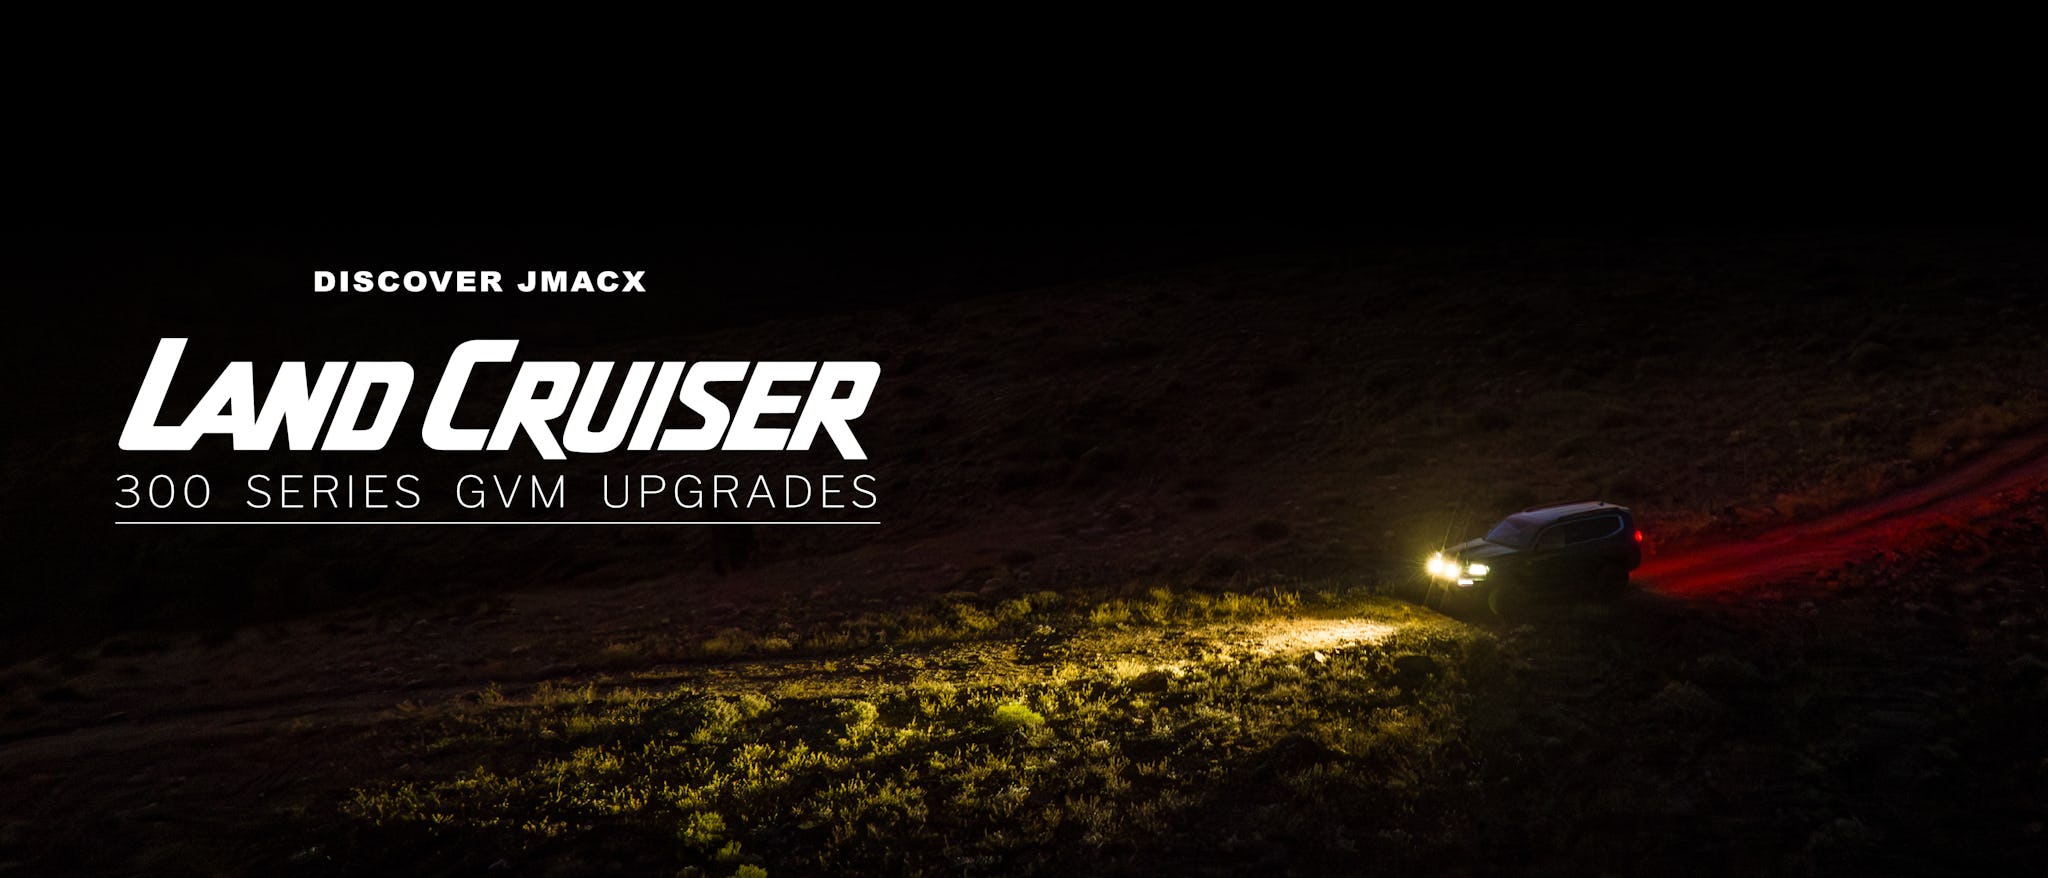 Landcruiser driving offroad at nighttime, with caption "Discover Jmacx Landcruiser 300 Series GVM Upgrades"